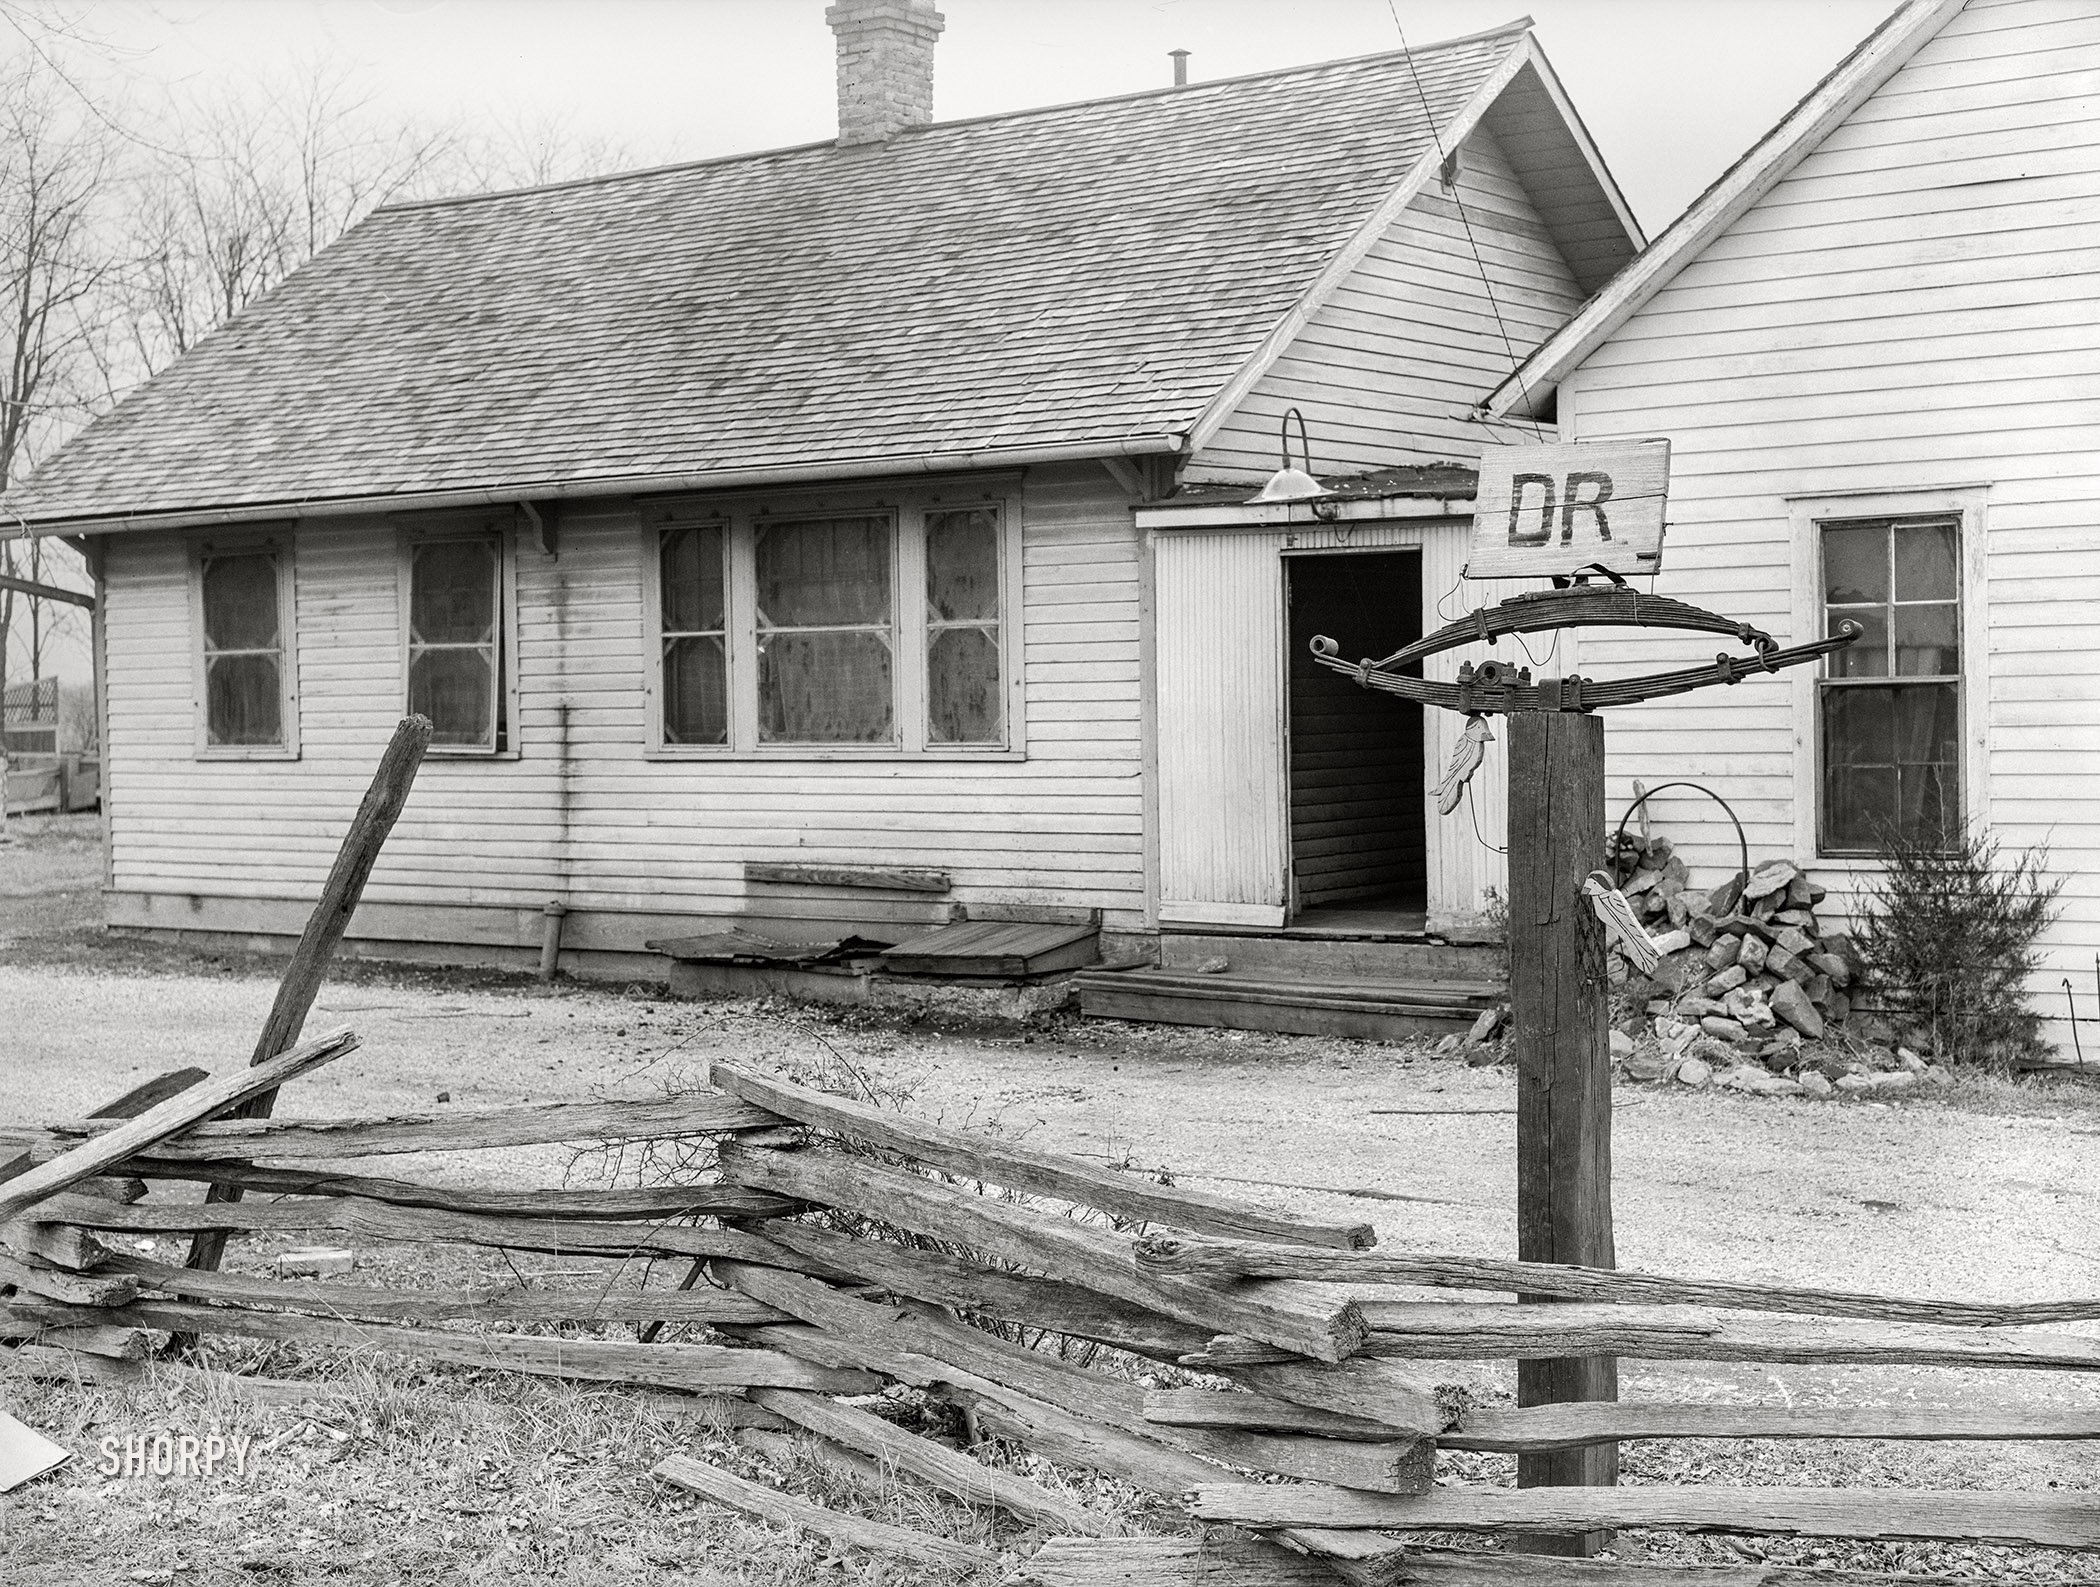 January 1939. "Dr. Springs' office. Colp, Illinois." Medium format acetate negative by Arthur Rothstein for the Farm Security Administration. View full size.